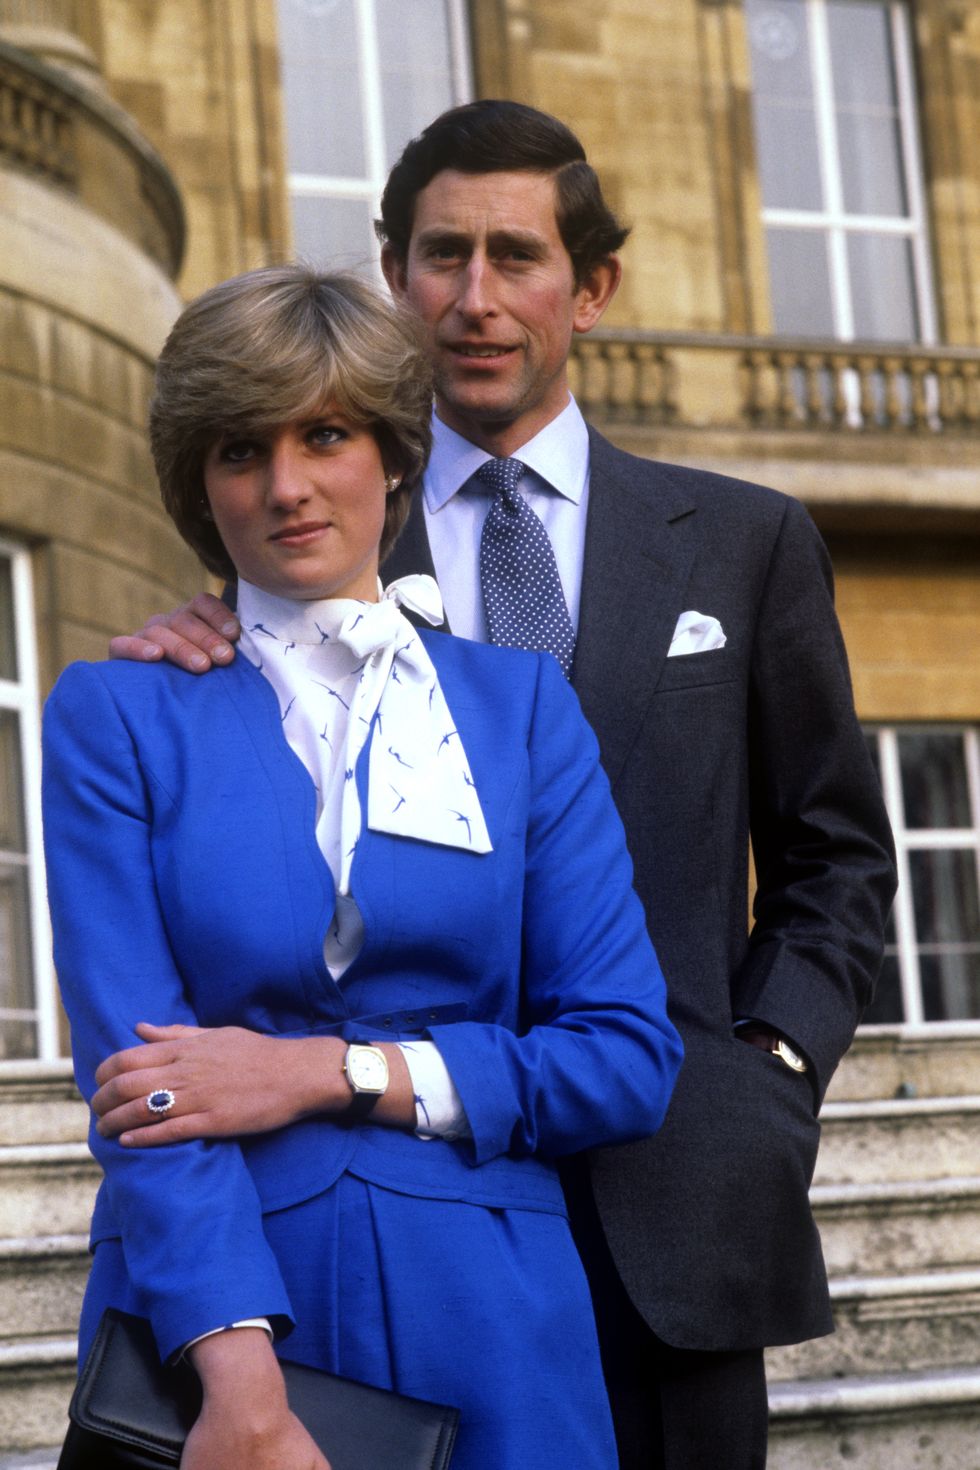 Princess Diana and Prince Charles' Engagement Photos in Real Life